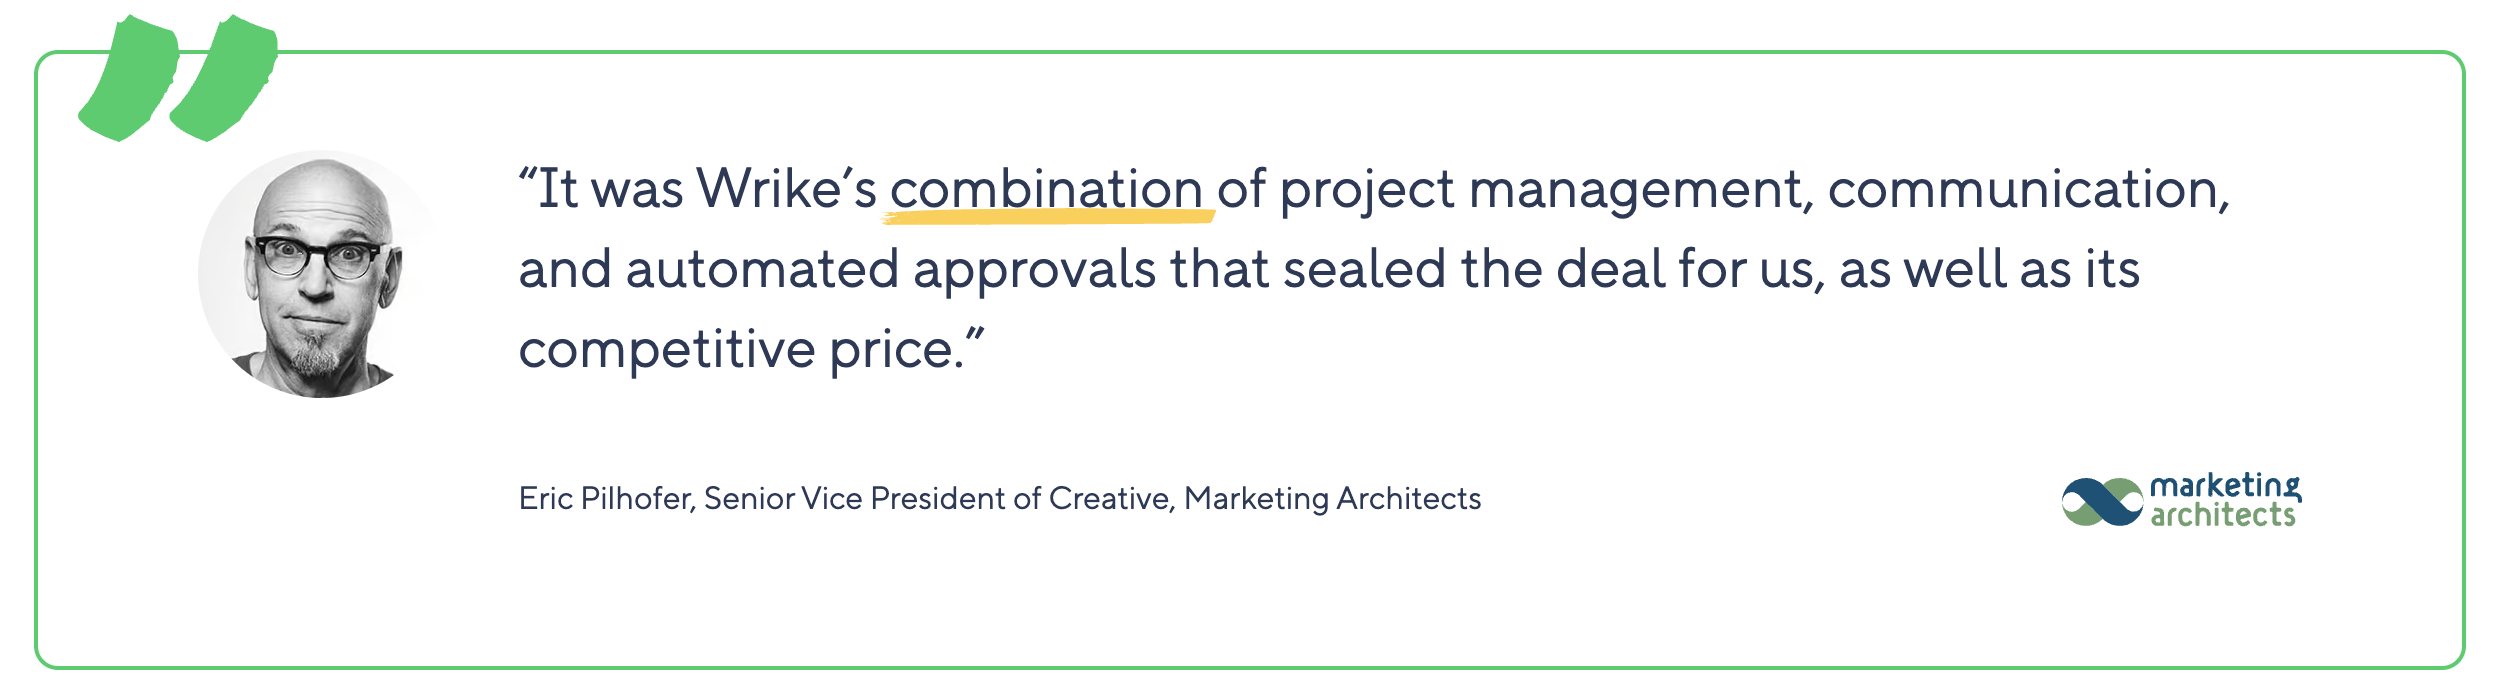 marketing architects quote